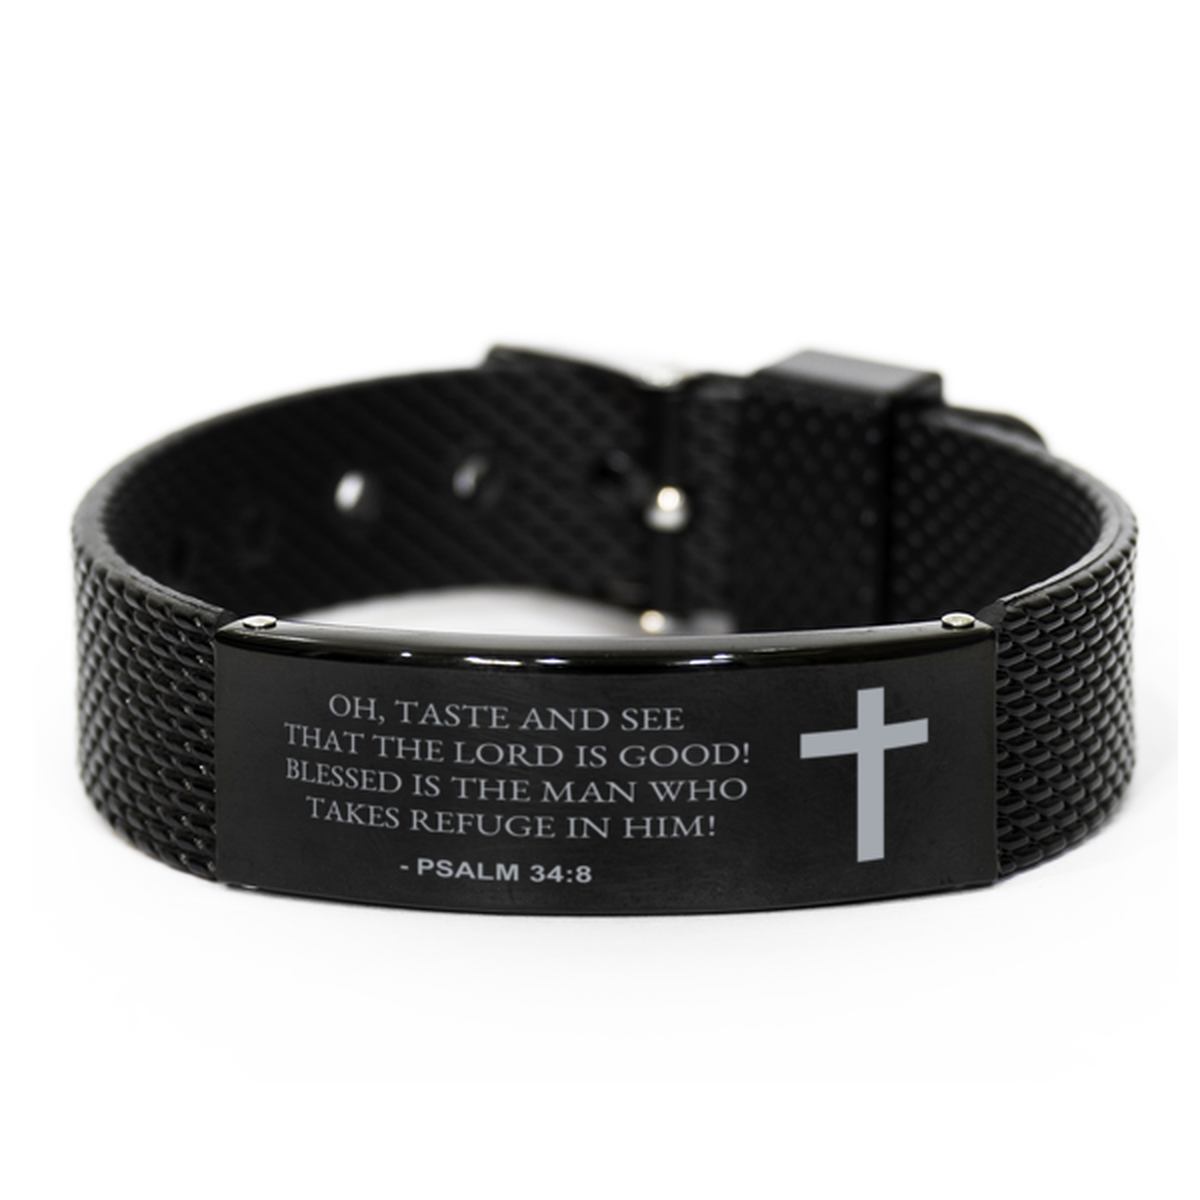 Christian Black Bracelet,, Psalm 34:8 Oh, Taste And See That The Lord Is Good! Blessed, Motivational Bible Verse Gifts For Men Women